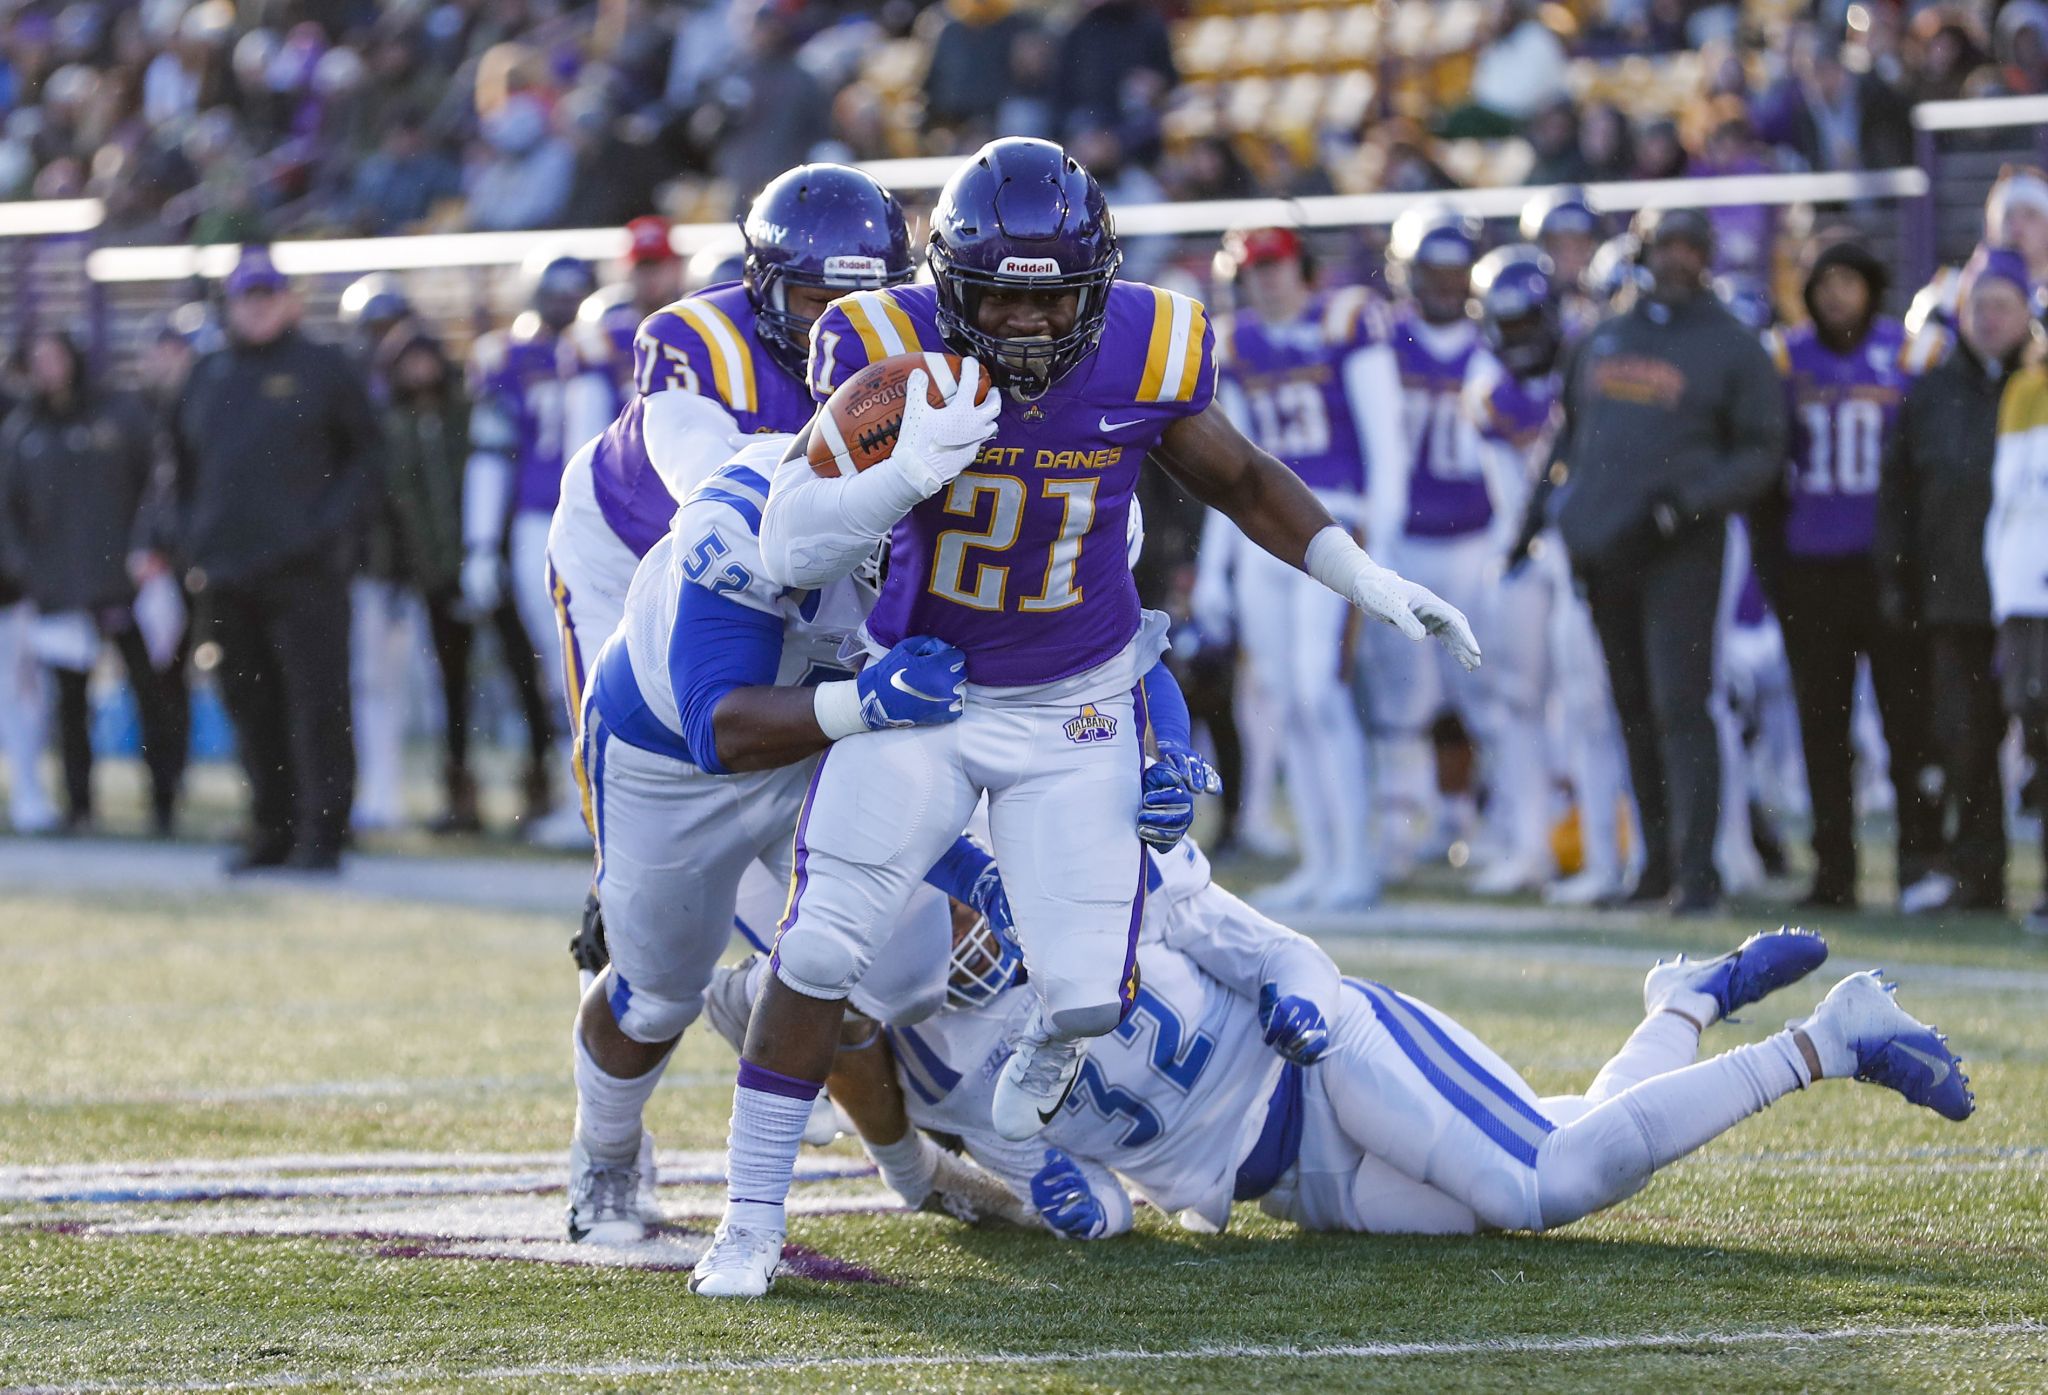 2021 Fcs Season Preview Albany The College Sports Journal 7931